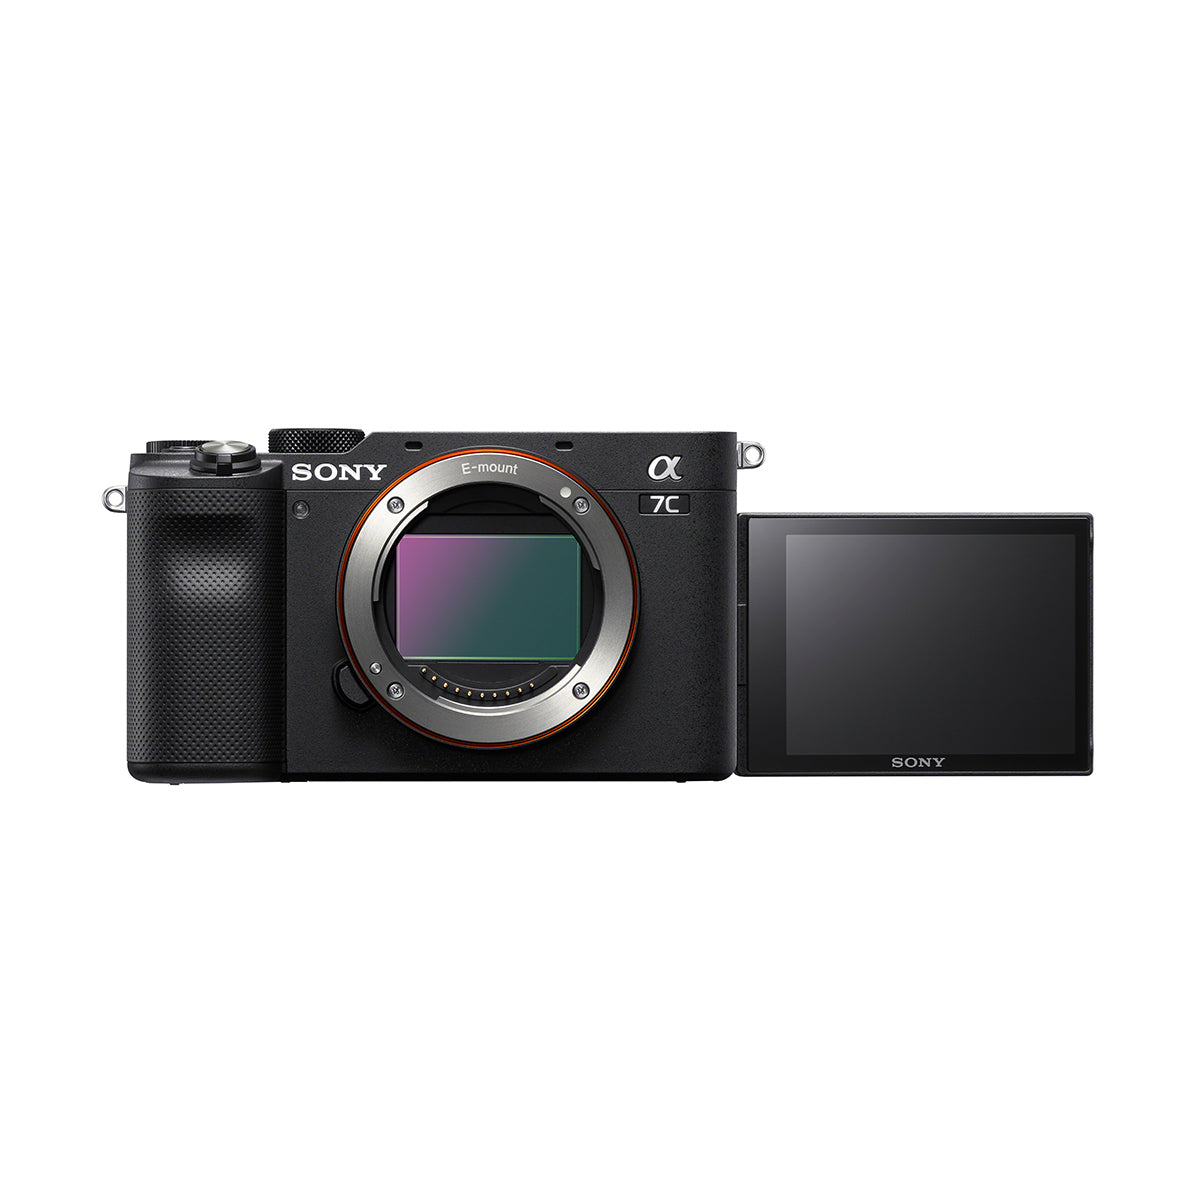 Sony Alpha a7C Full Frame Mirrorless Camera with FE 28-60mm f/4-5.6 Lens (Black)